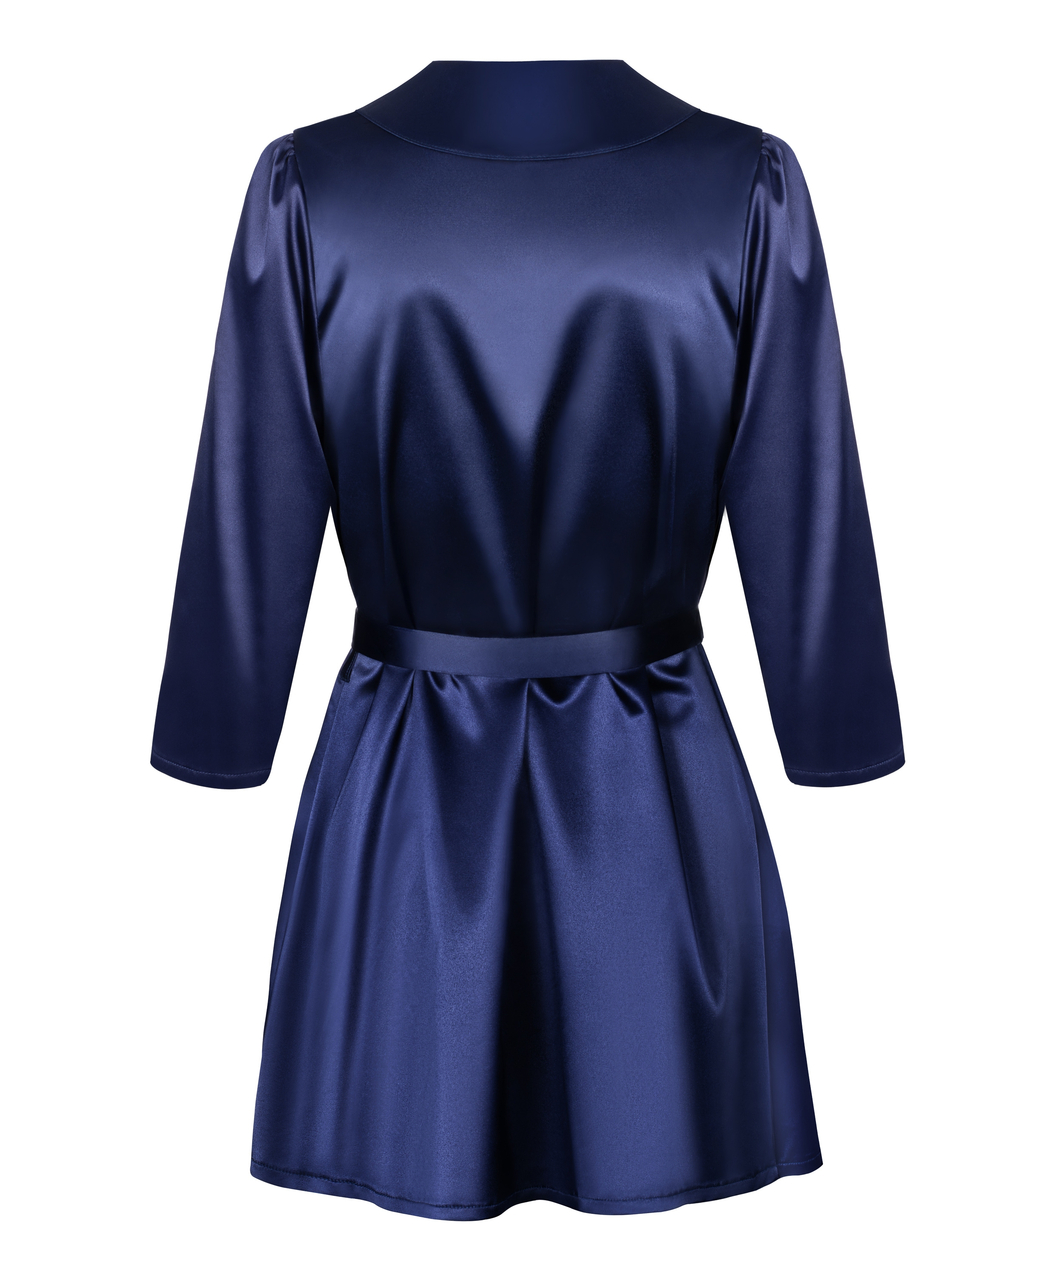 Obsessive navy blue robe with string